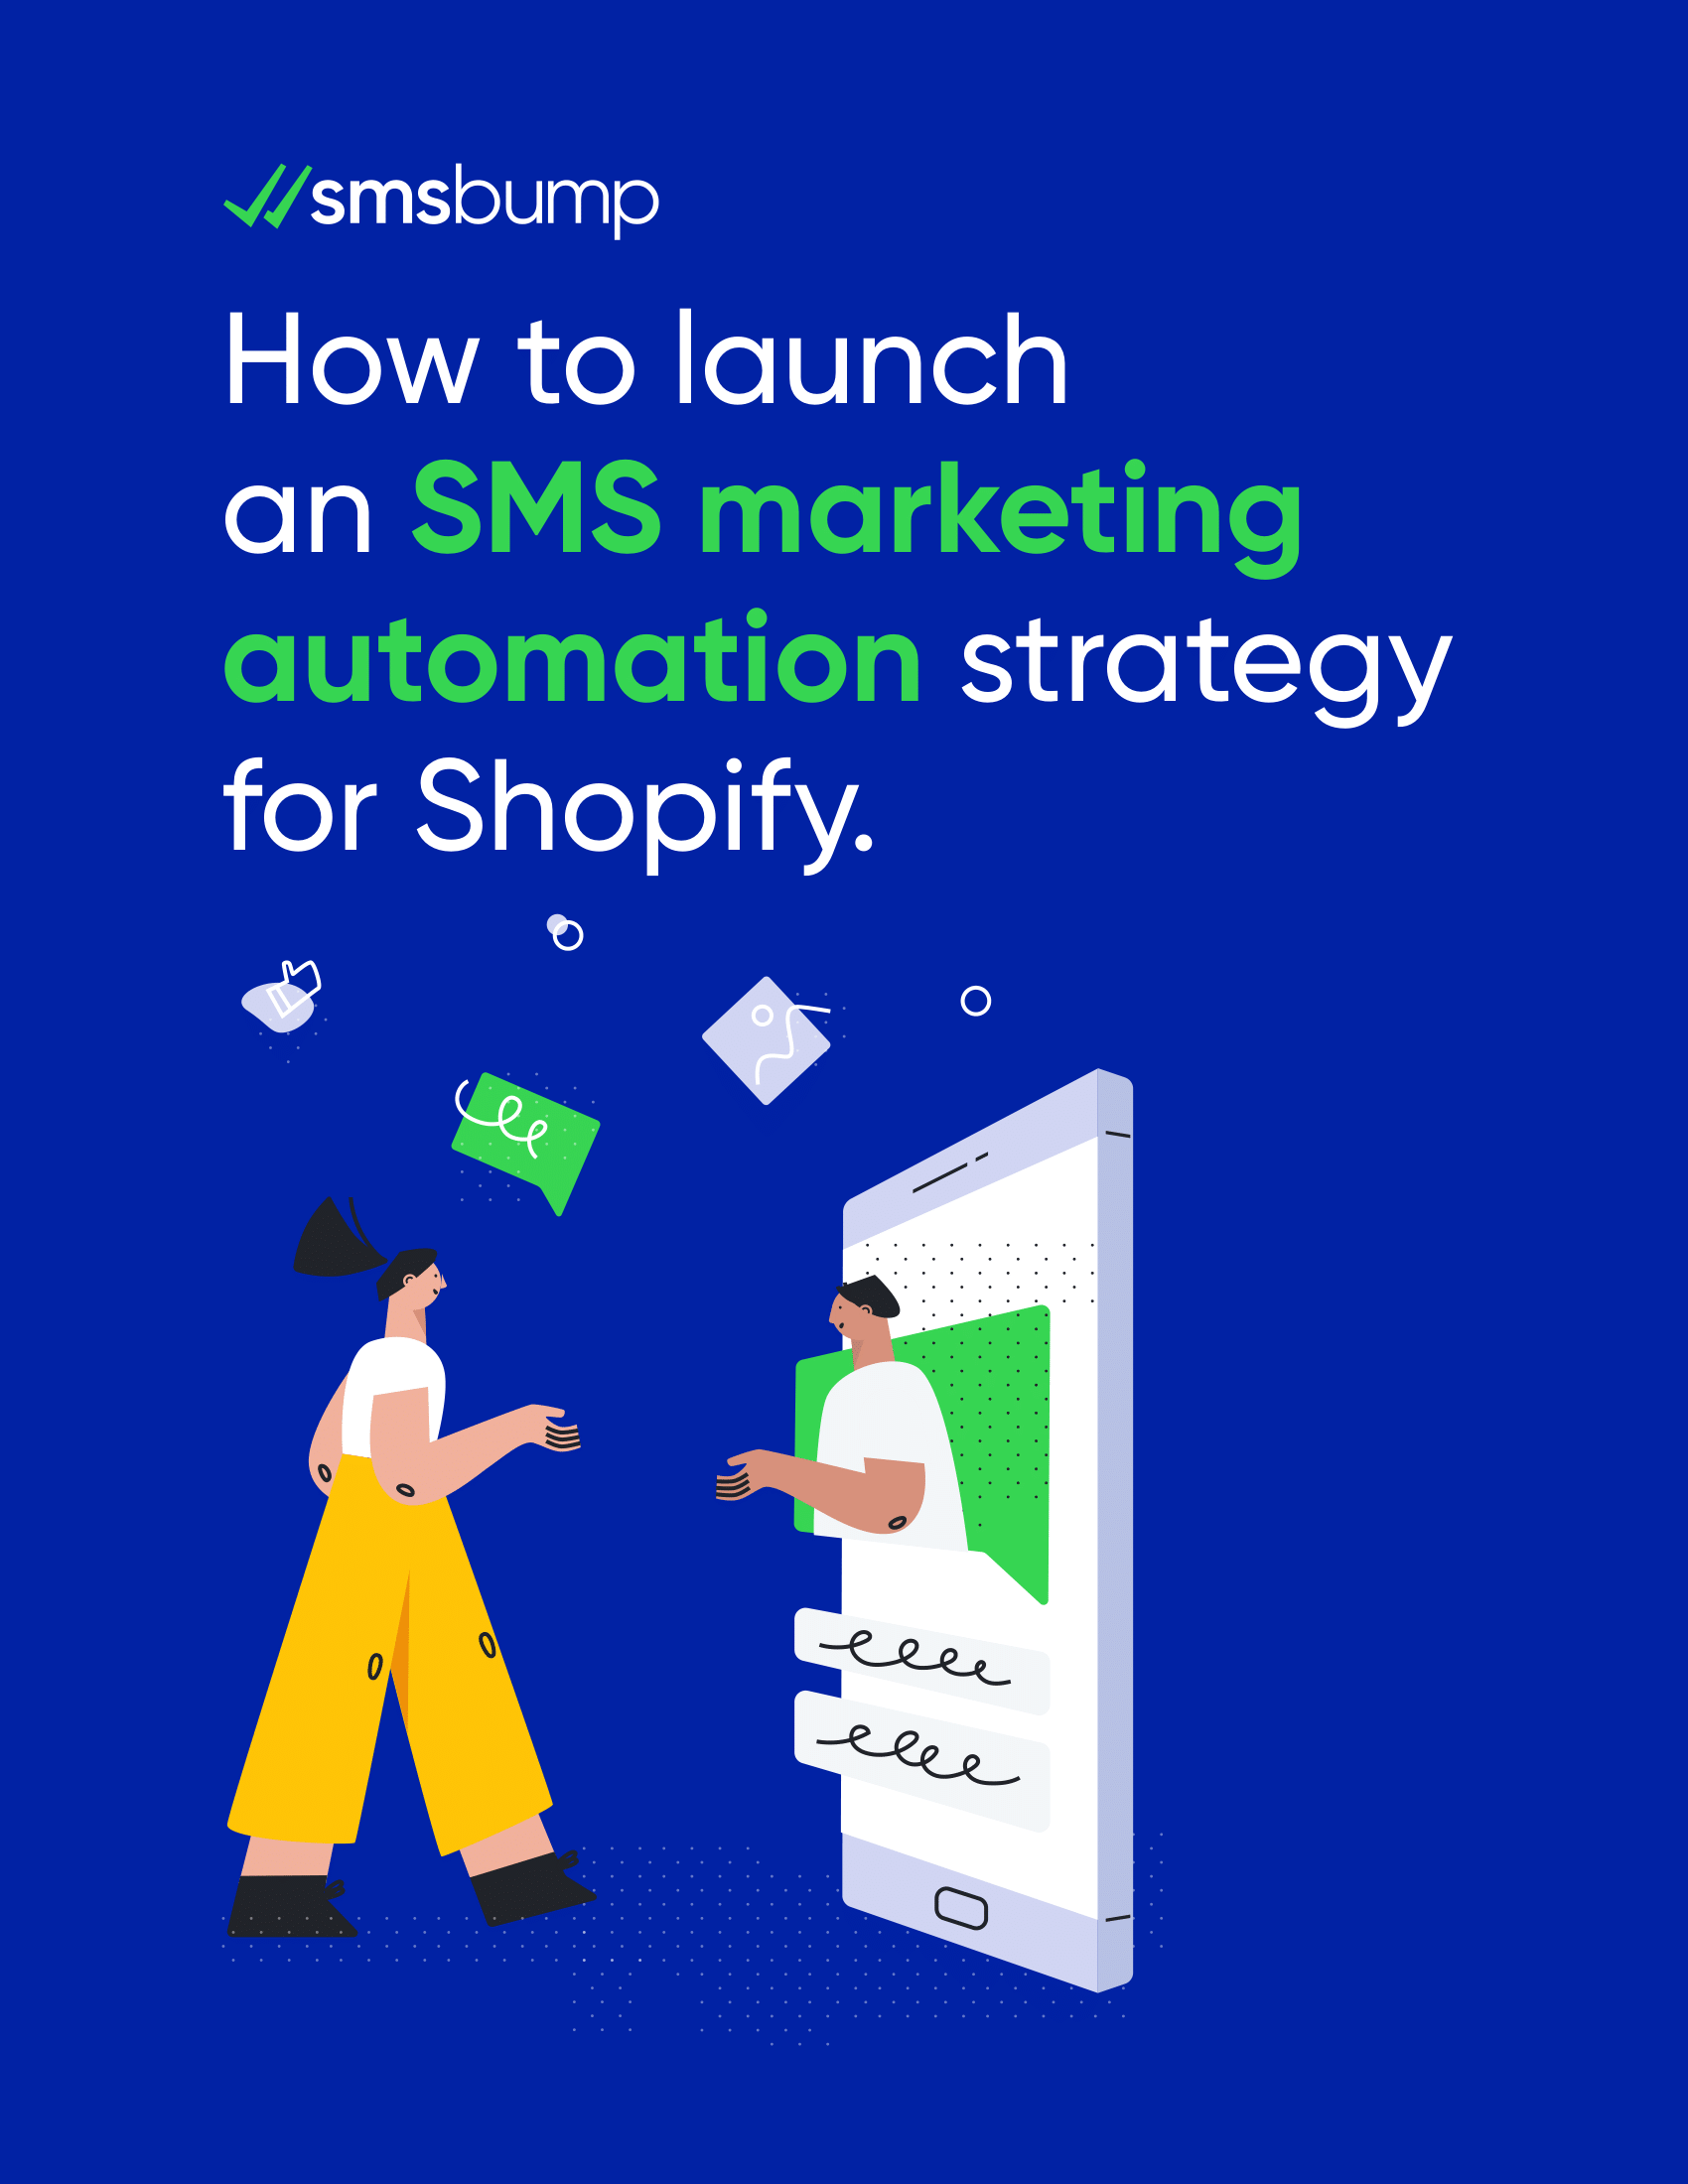 How to launch an SMS marketing automation strategy for Shopify